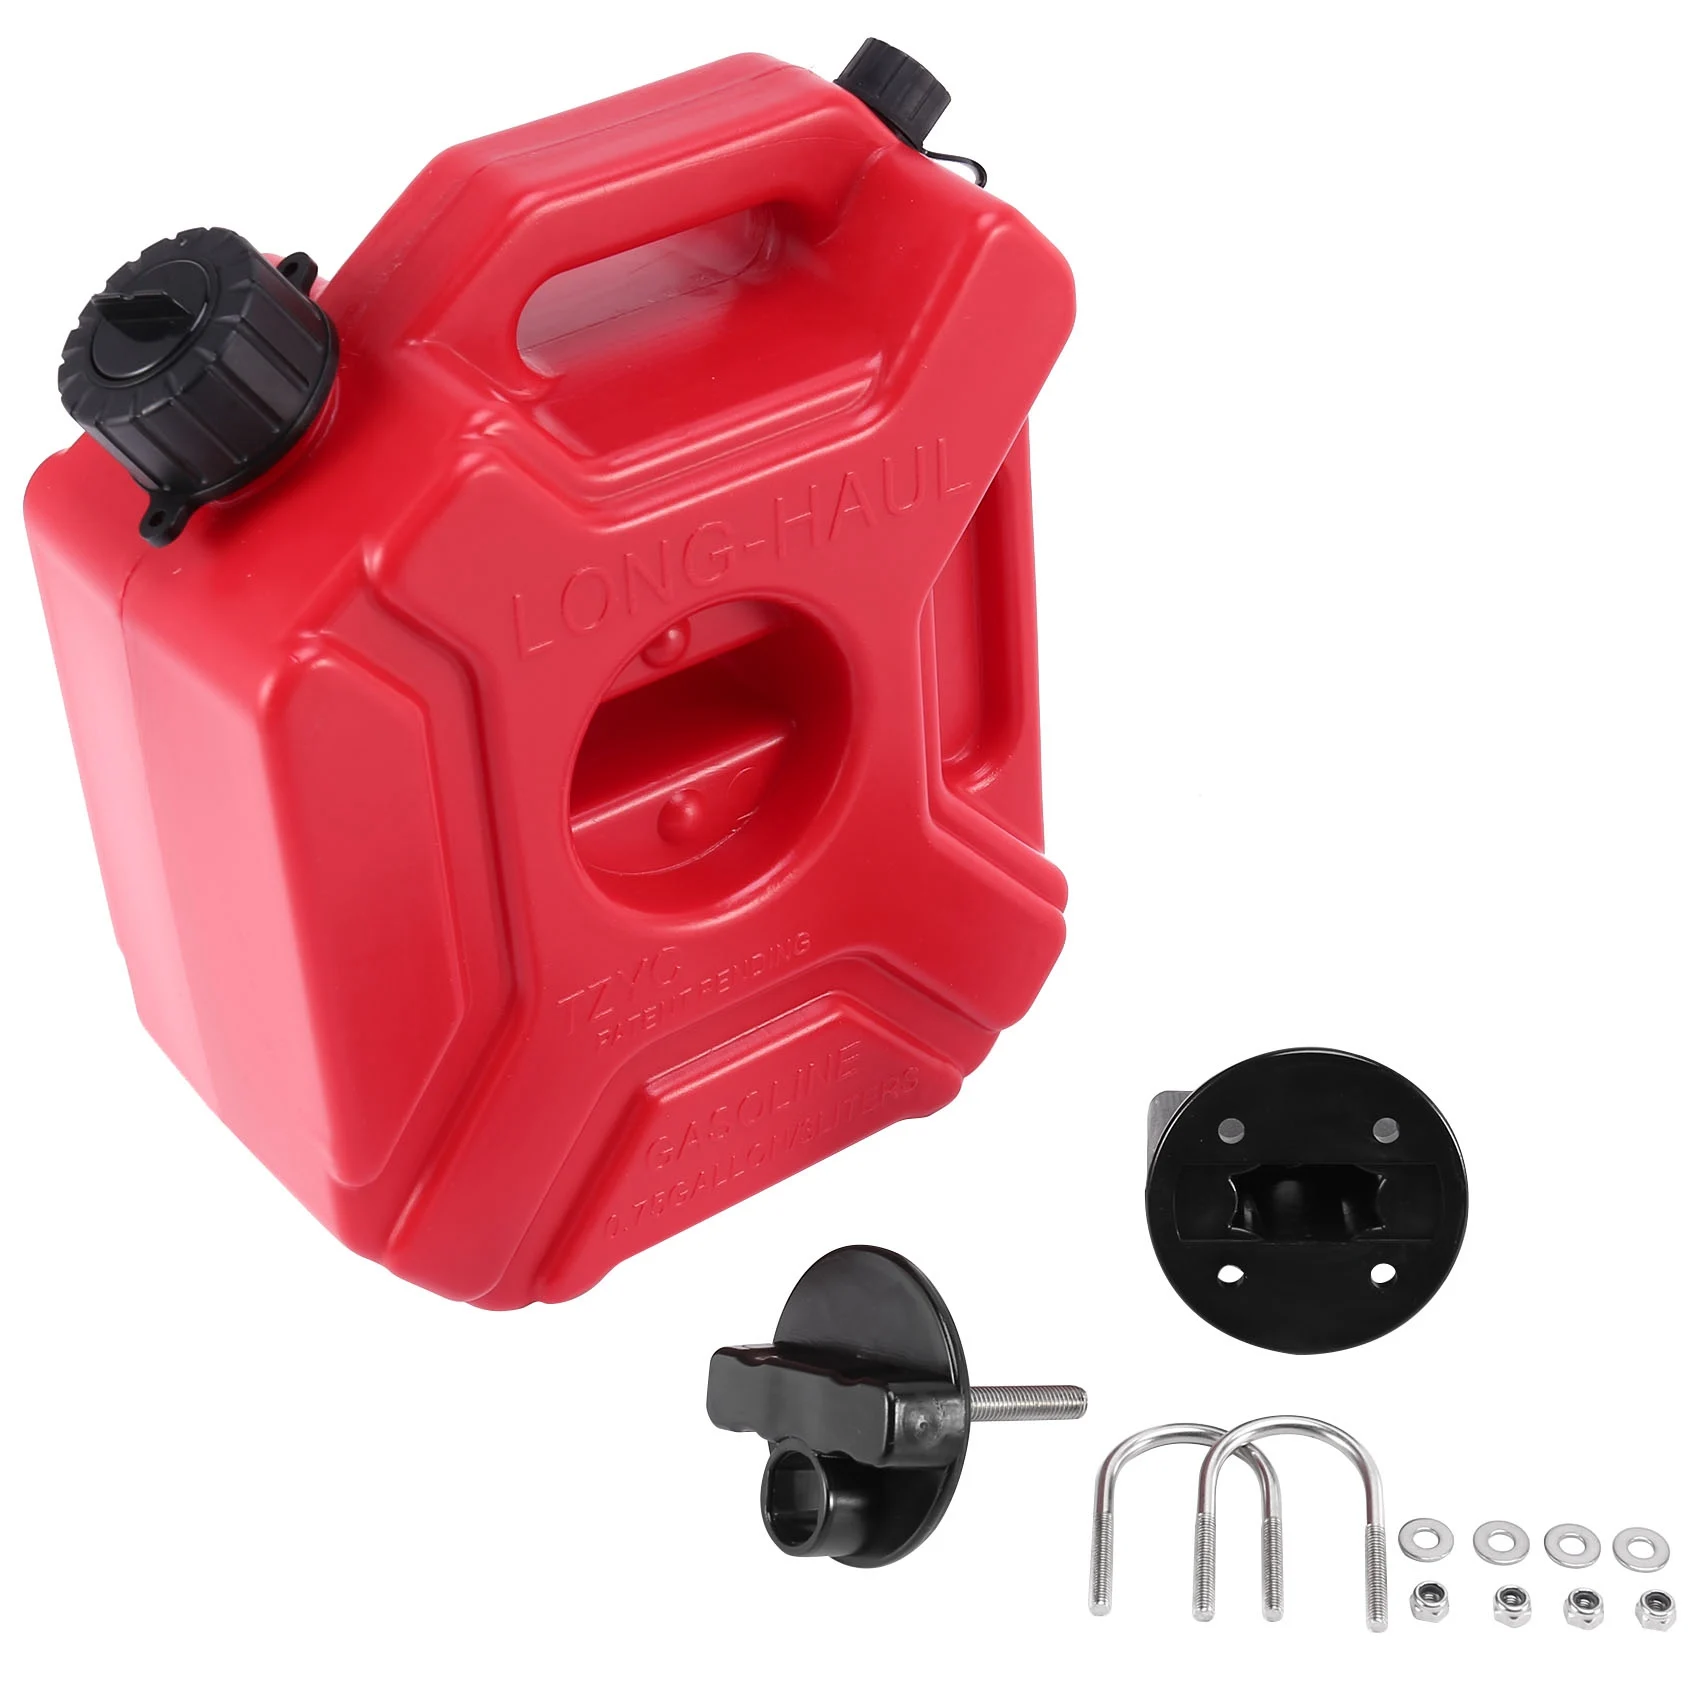 

3 Litres Fuel Tank Plastic Spare Petrol Tanks Cans Gasoline Oil Container Fuel- For Motorcycle